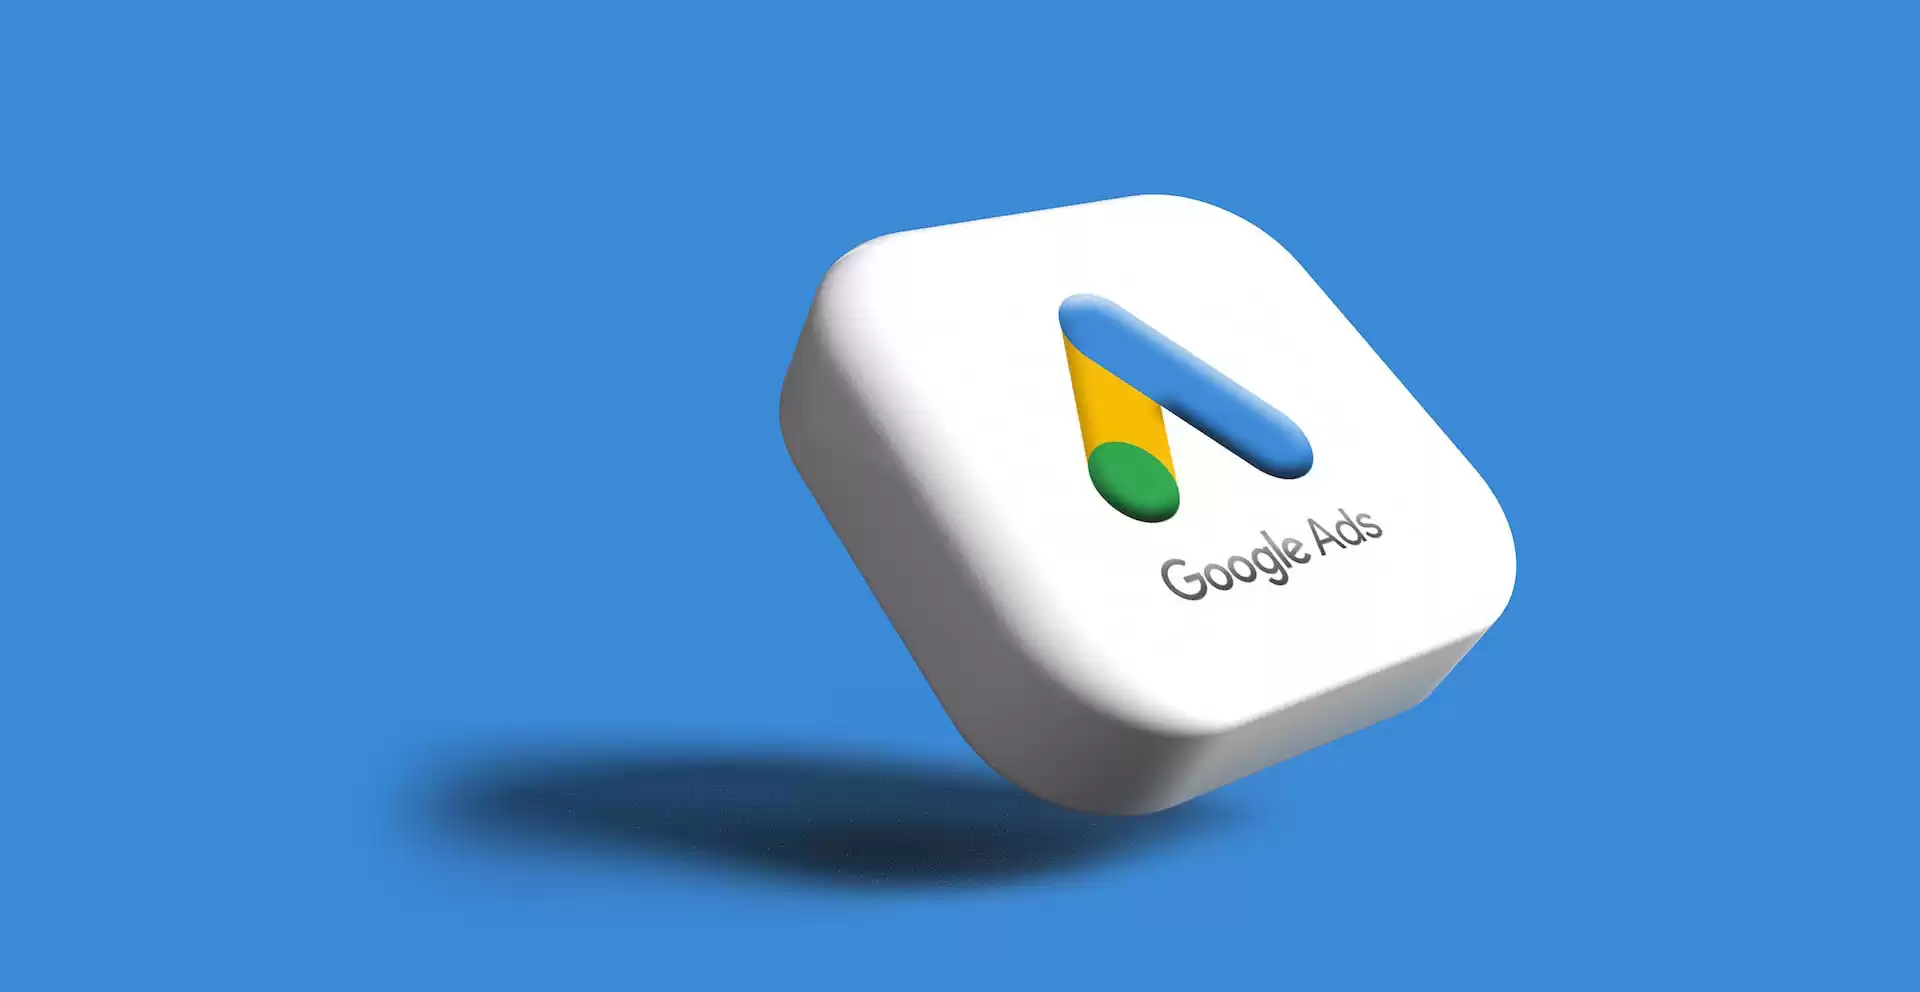 3d render of the Google Ads button